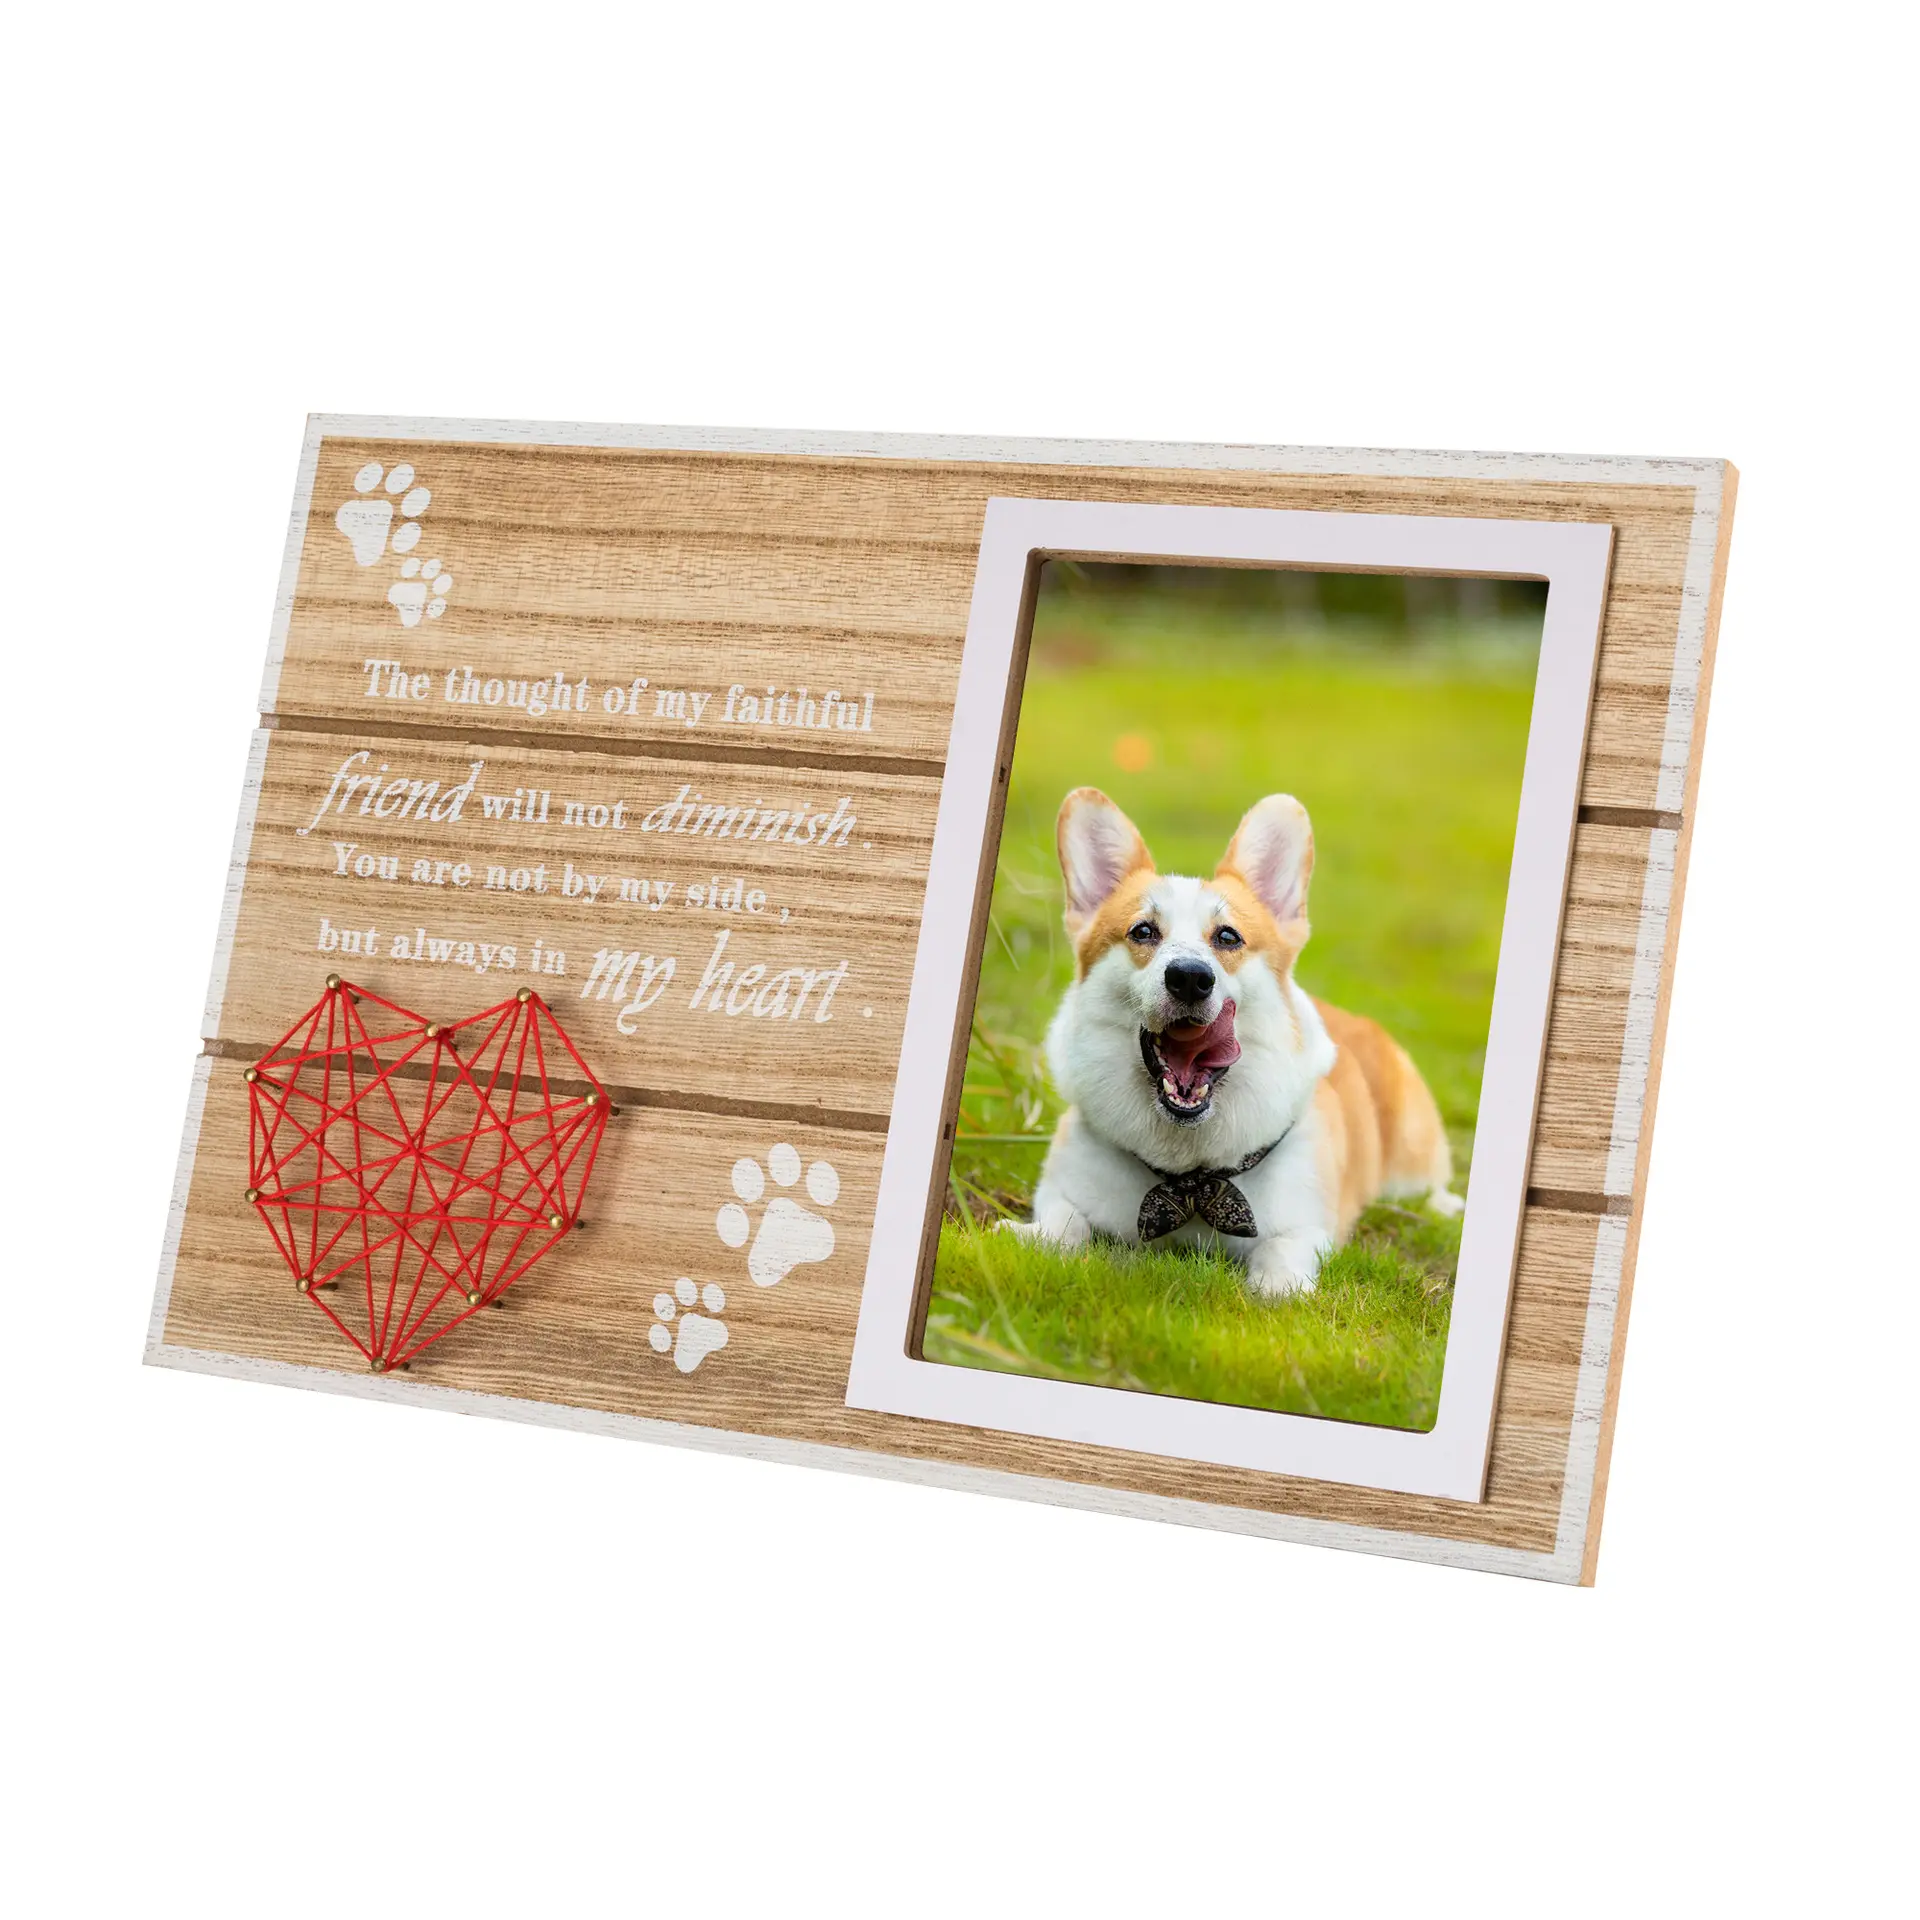 paw prints woven heart design wooden cat dog pet loss picture frame memorial Remembrance sympathy gifts